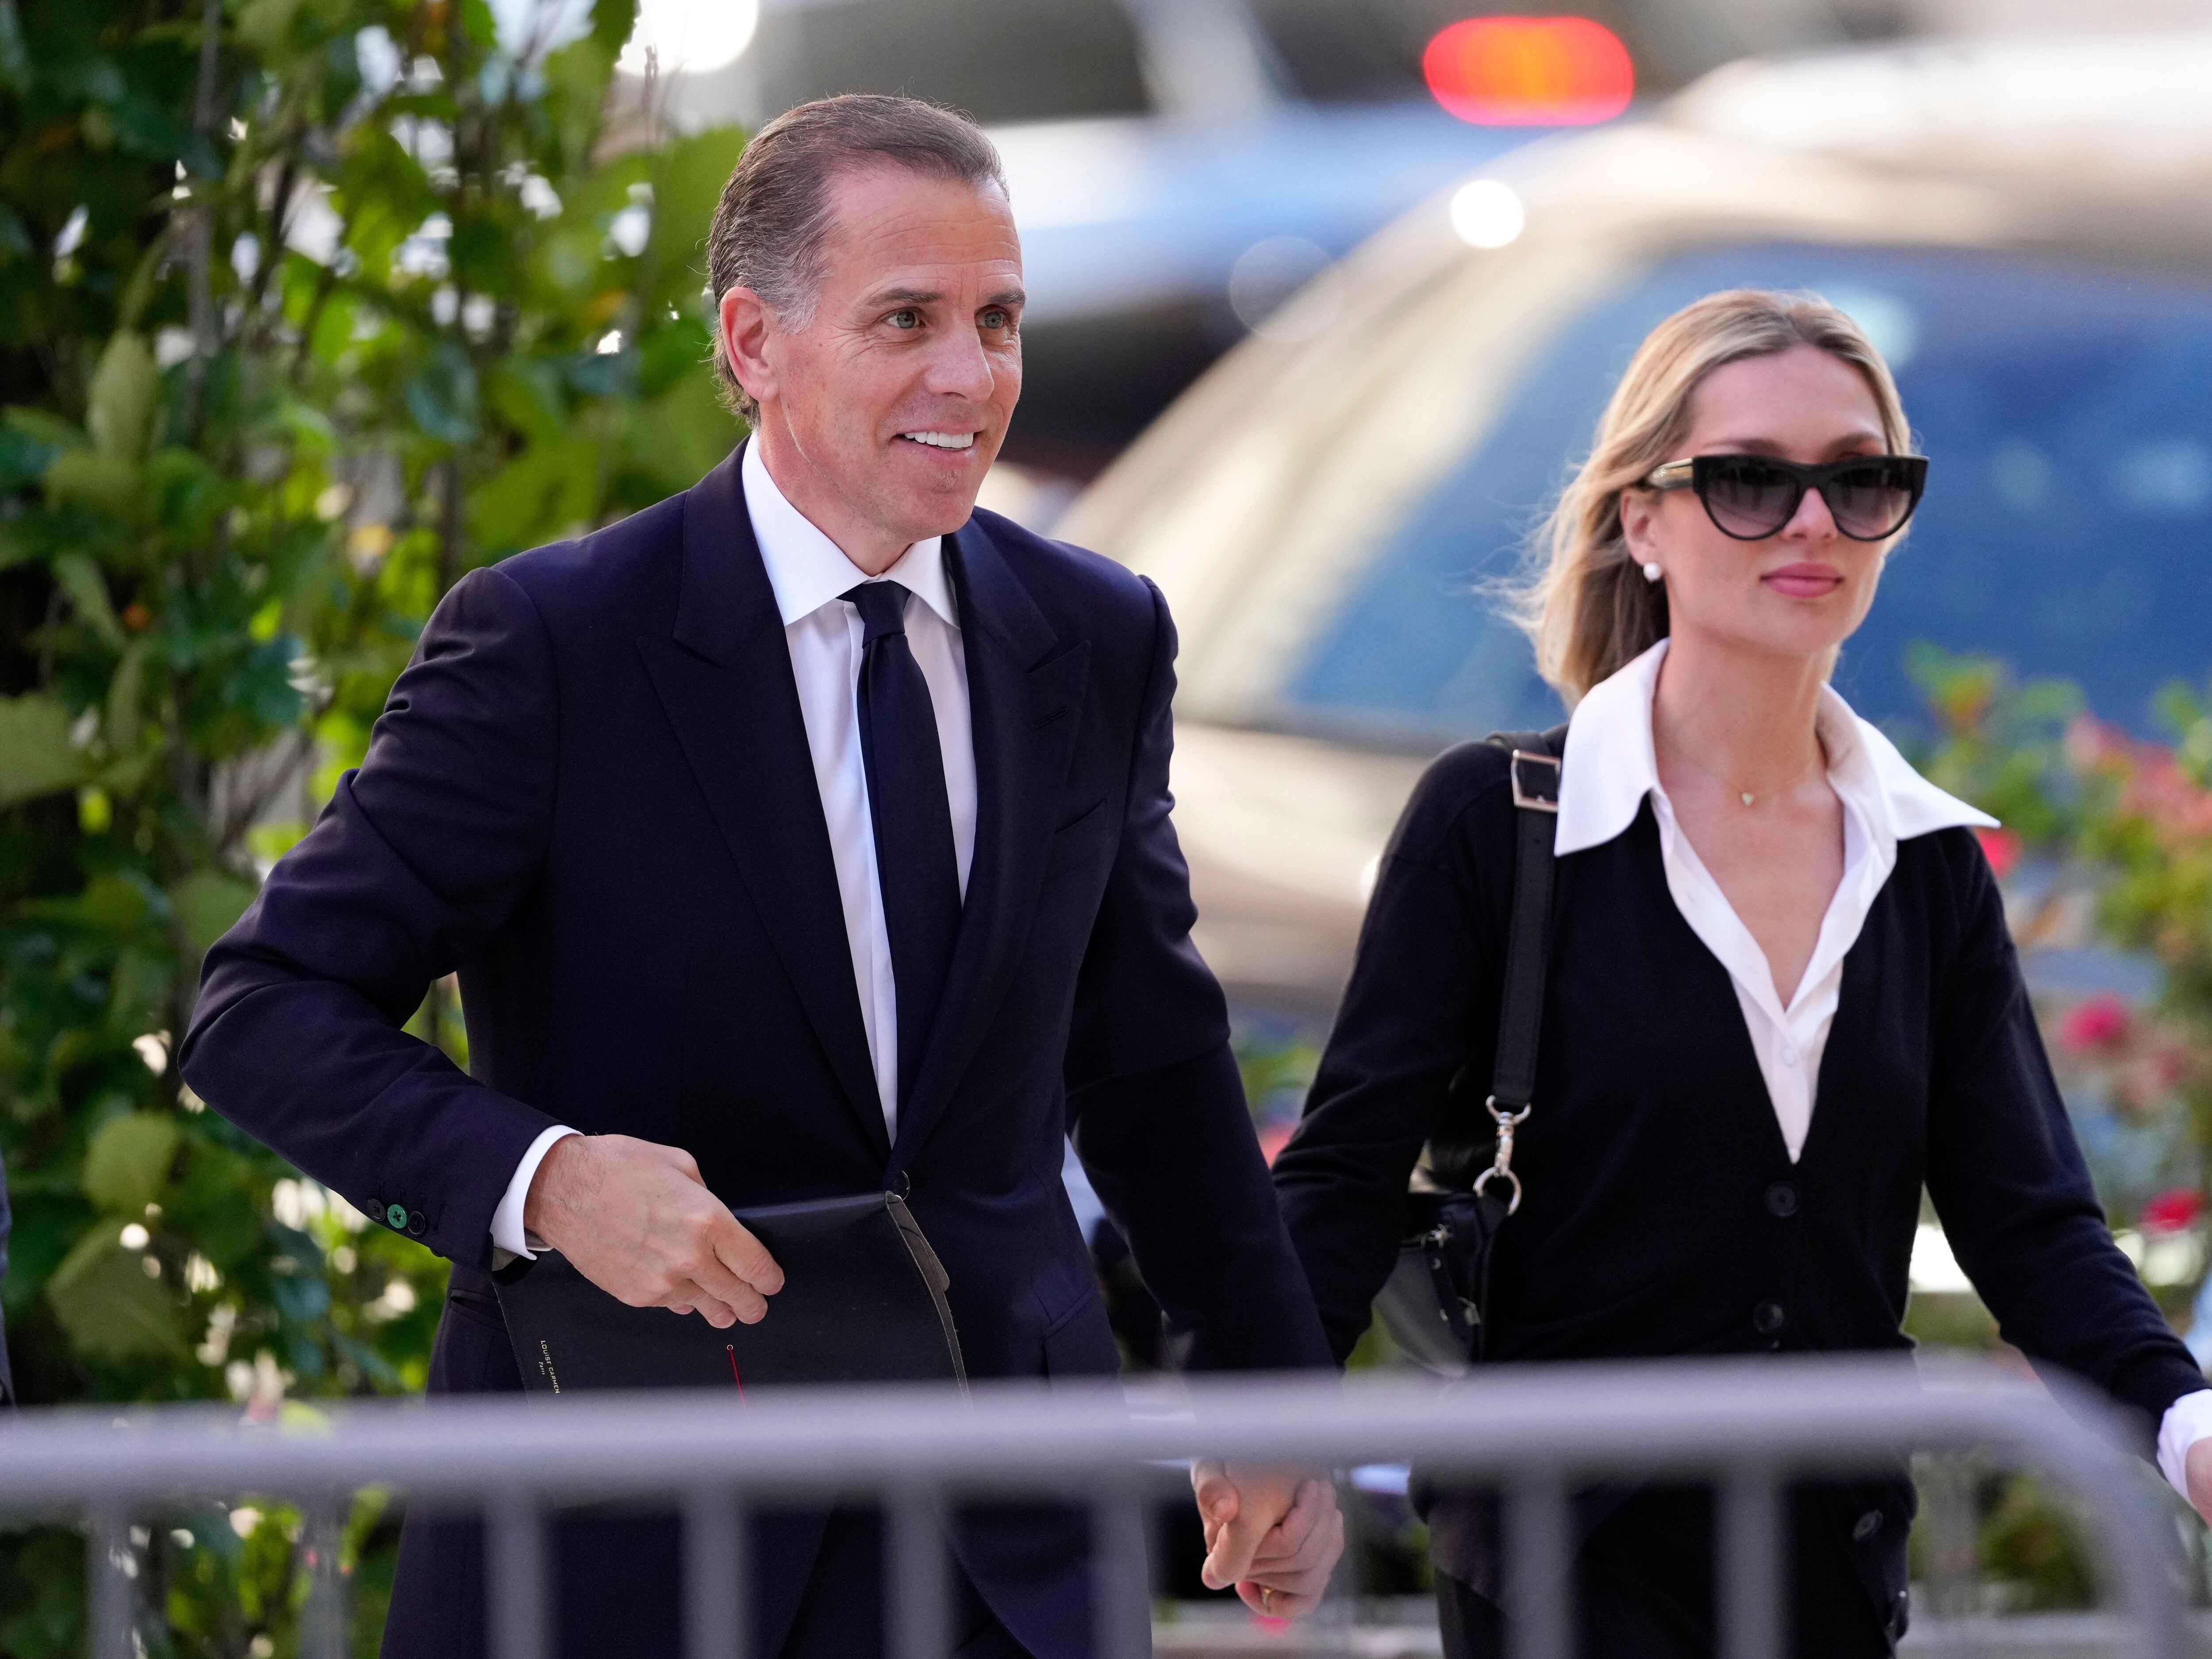 Prosecutor says ‘no one above law’ as he urges jurors to convict Hunter Biden